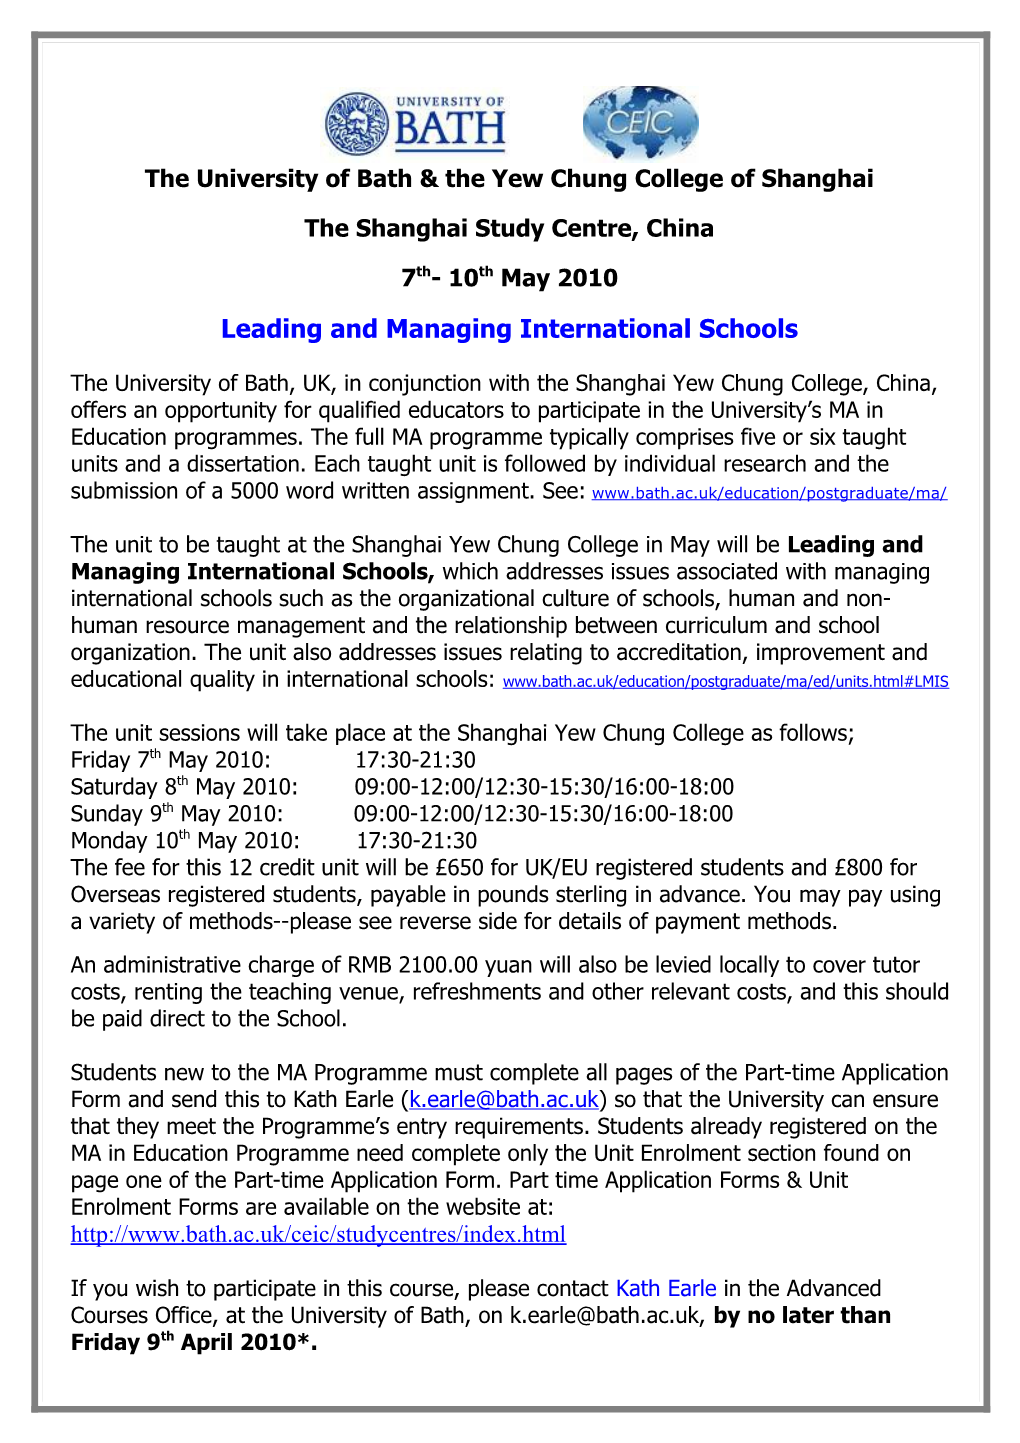 The University of Bath & the Yew Chung College of Shanghai